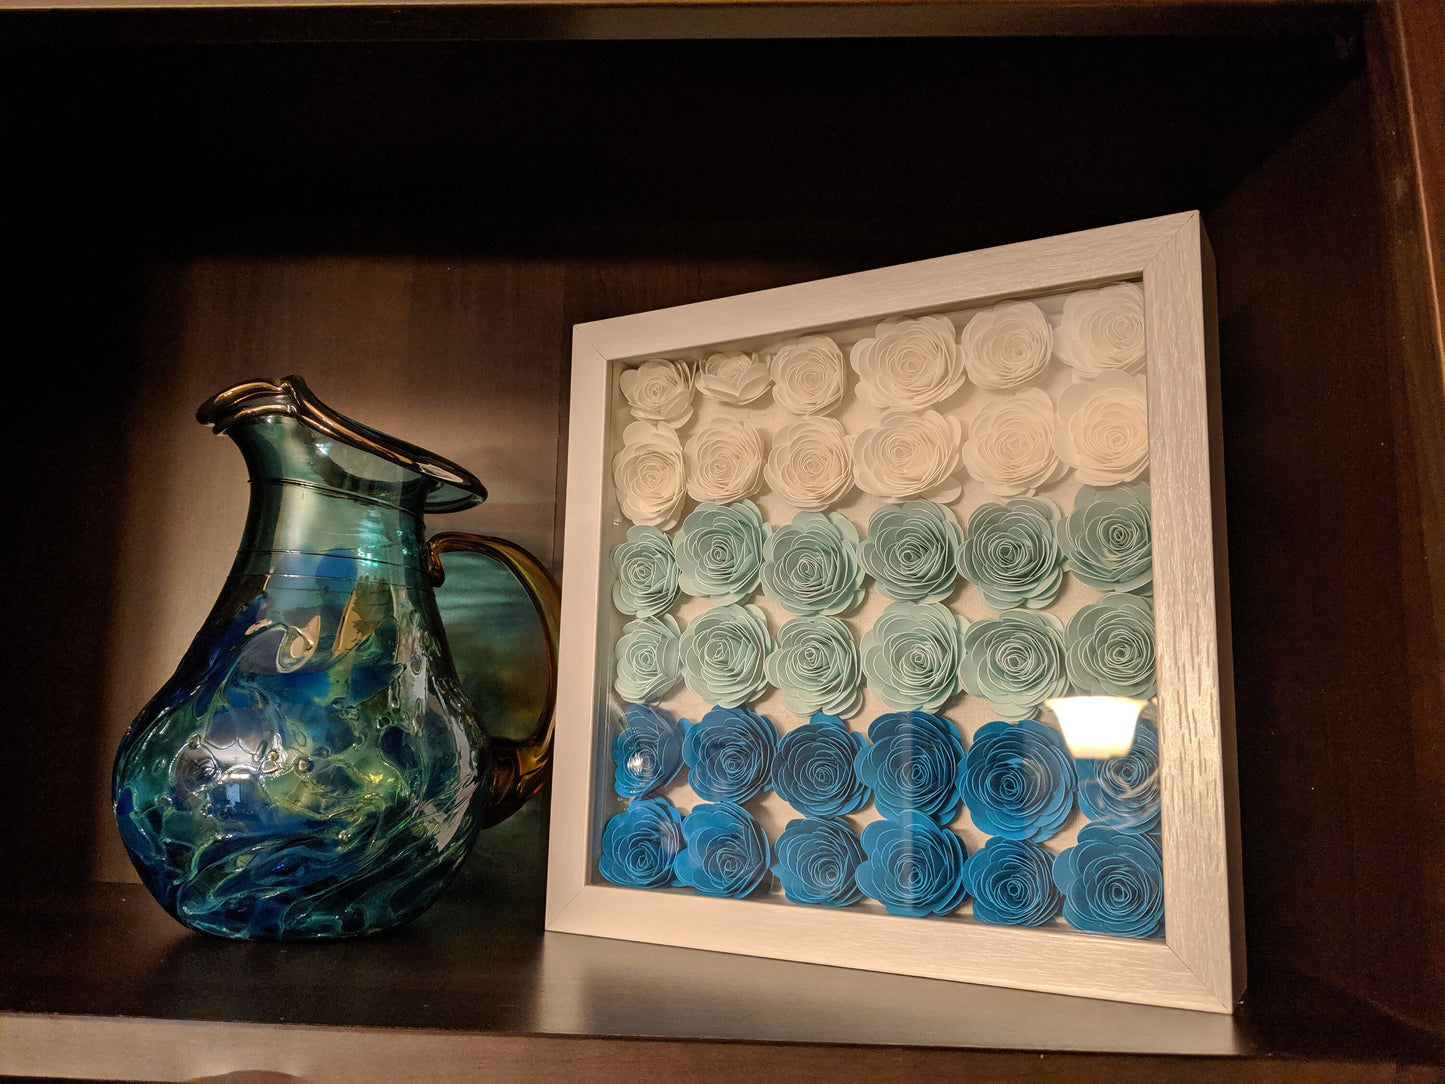 Rolled paper flower shadow box home sweet home decor